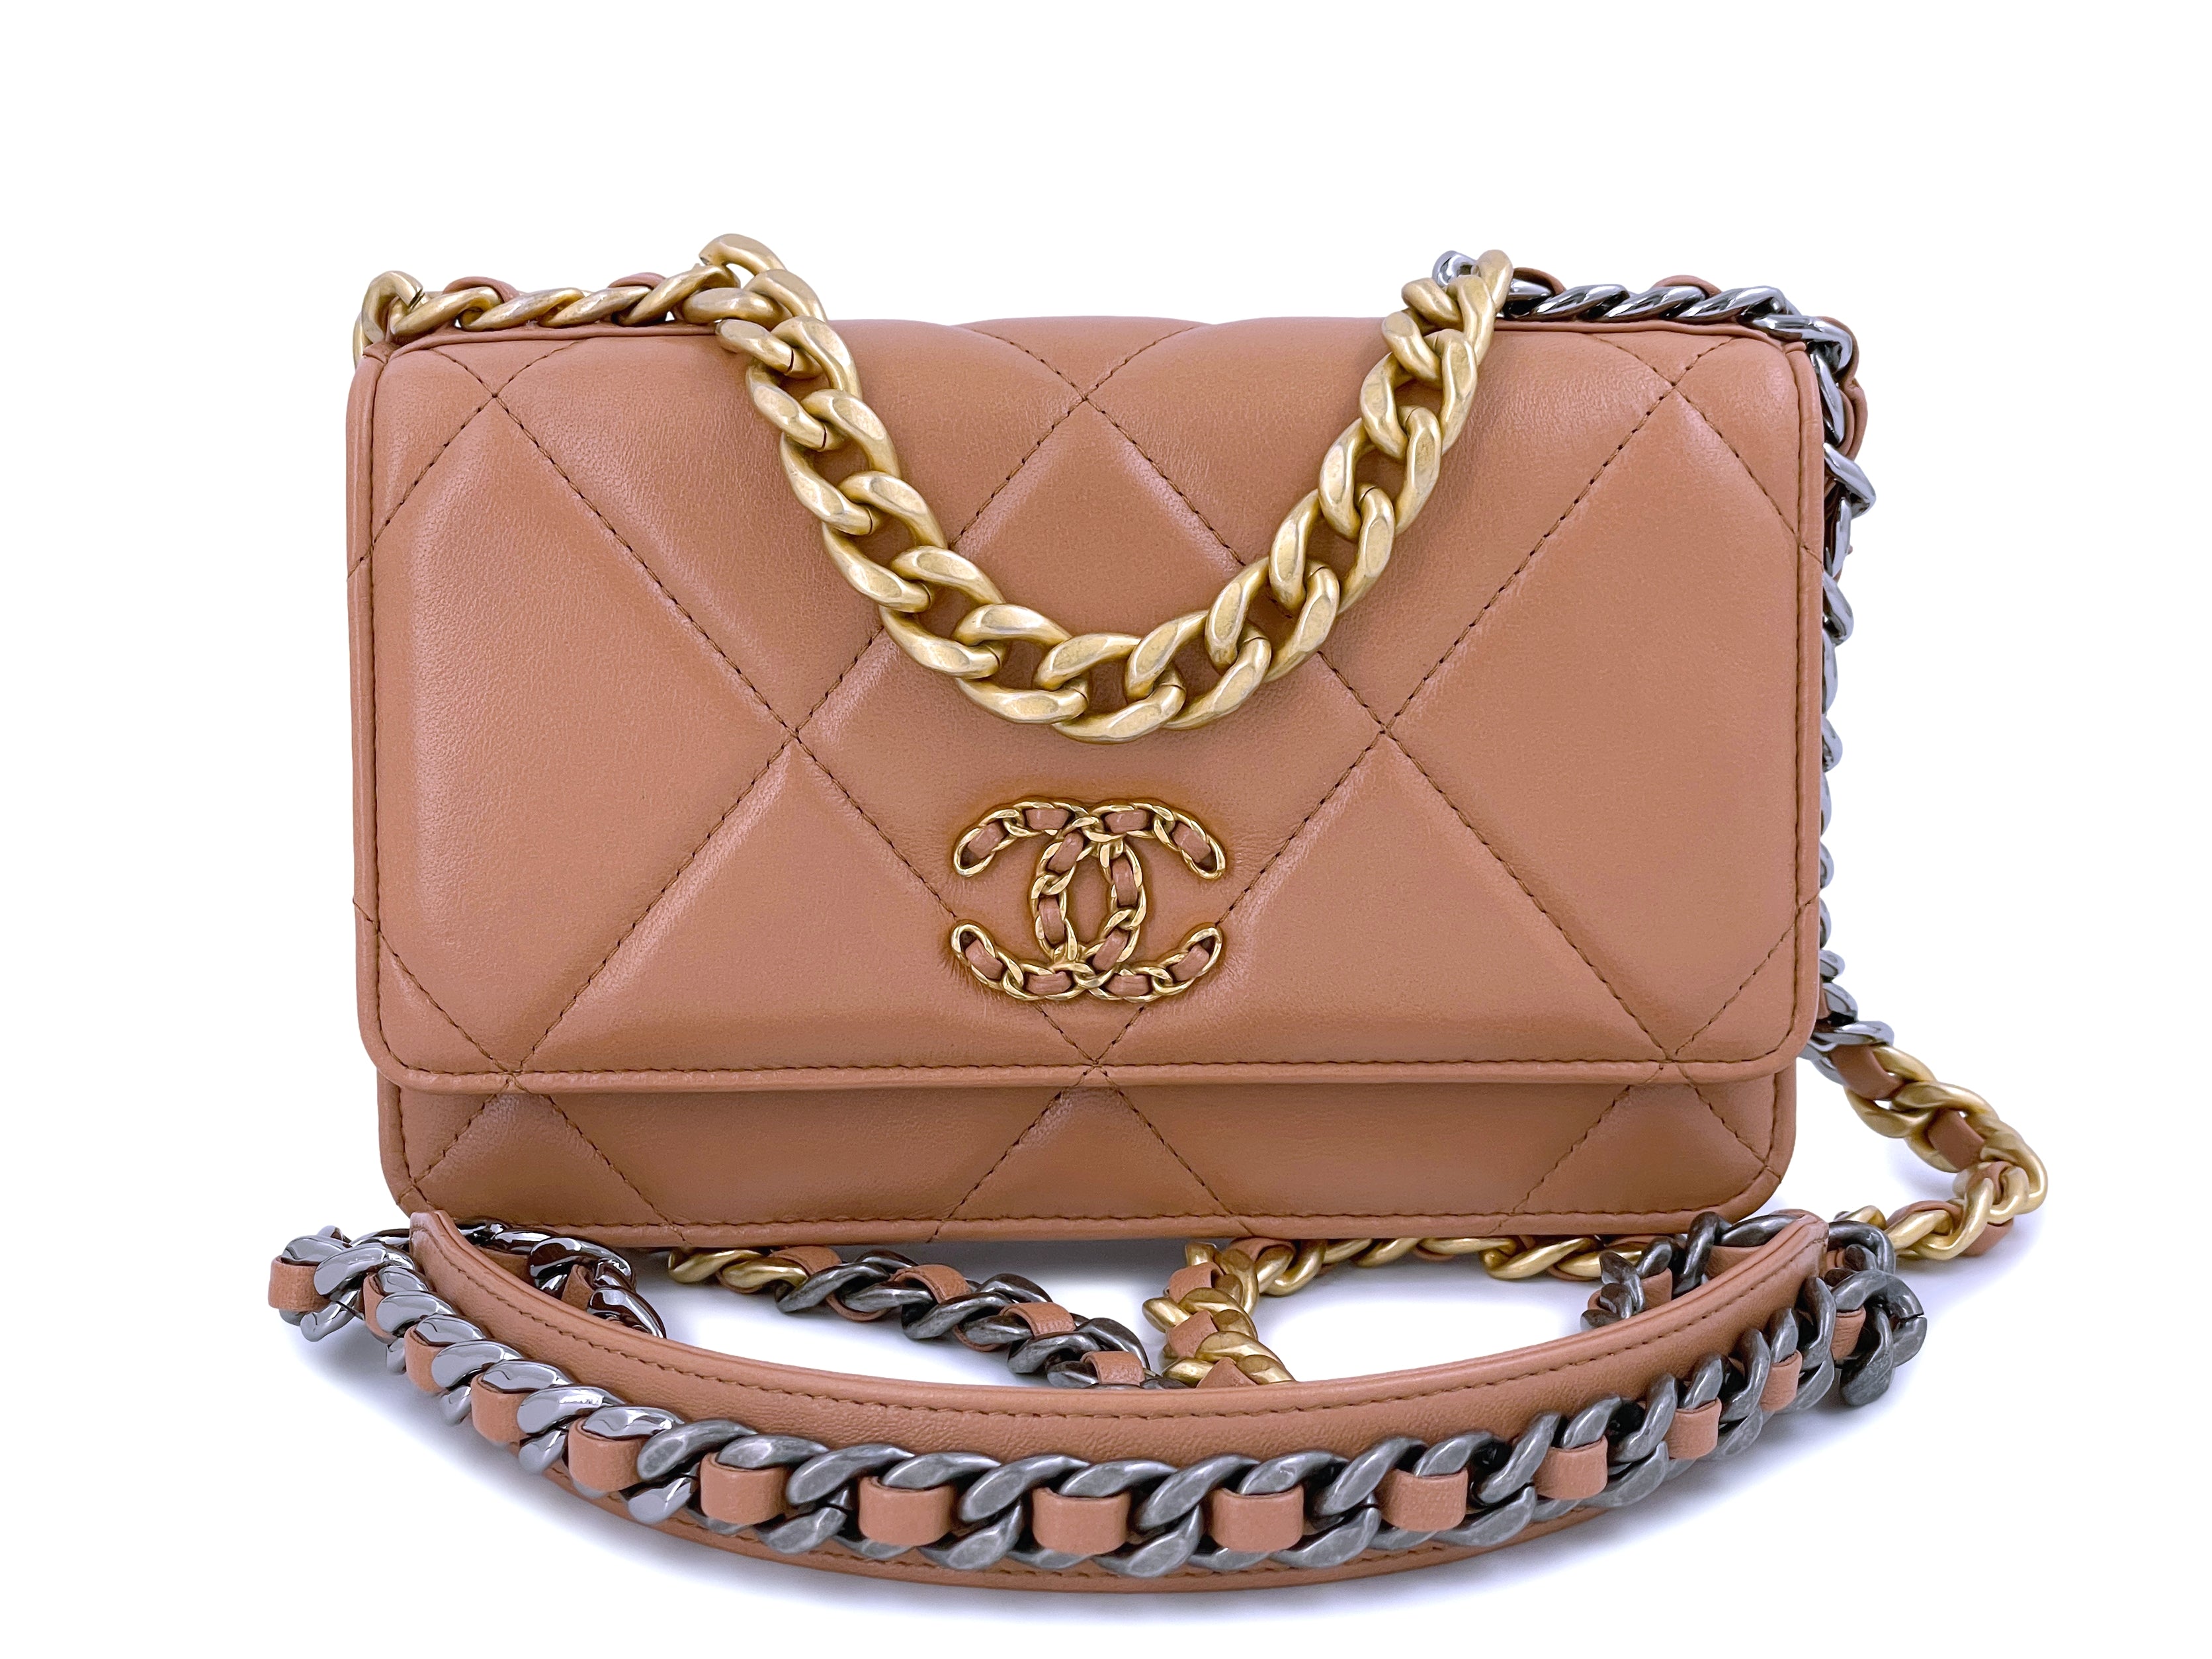 CHANEL Patent Leather Wallet-on-the-chain WOC Crossbody Flap Bag - Light  beige / pink